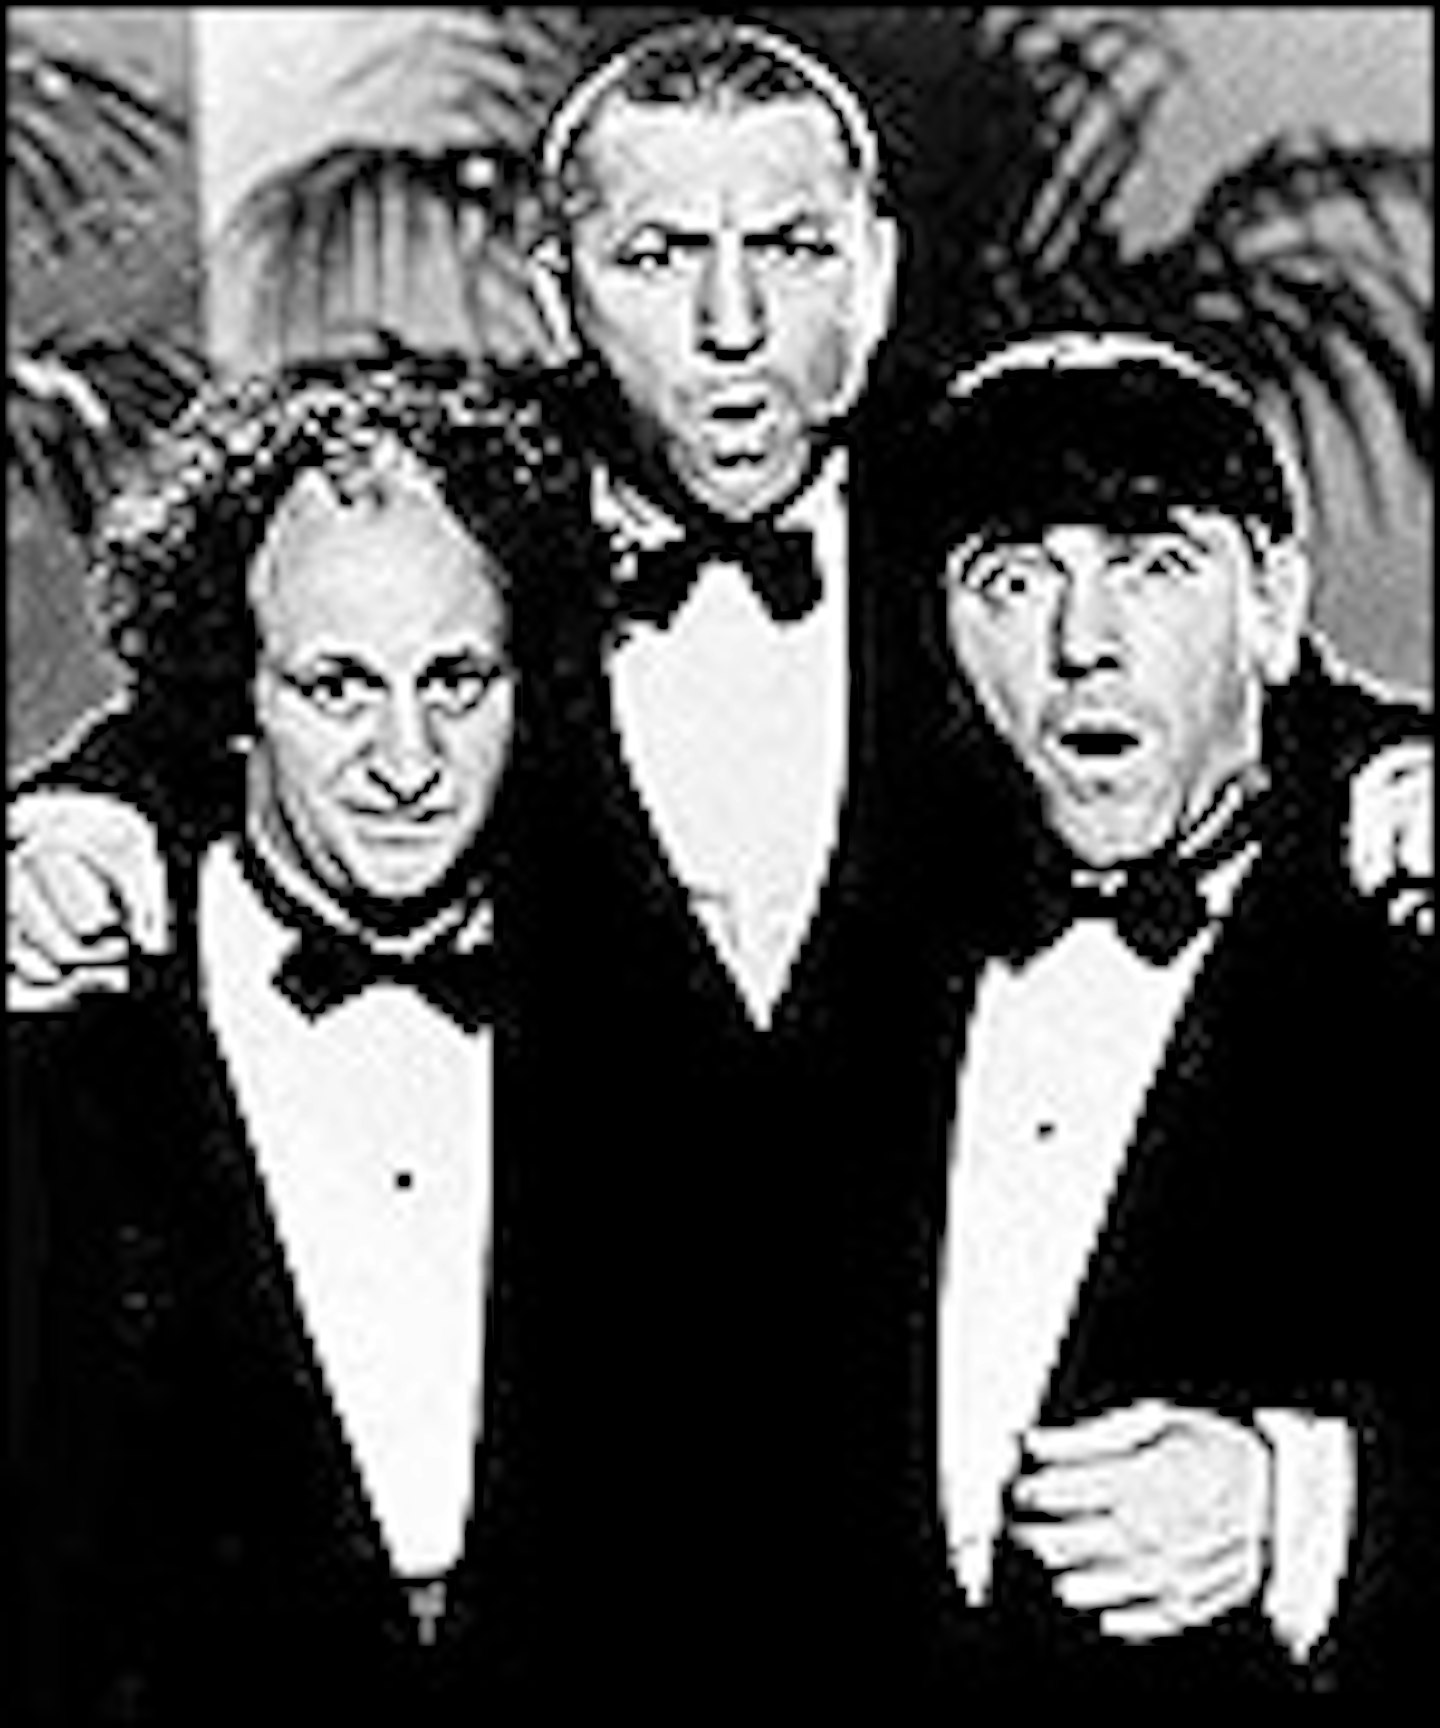 Farrelly Brothers to Film Three Stooges